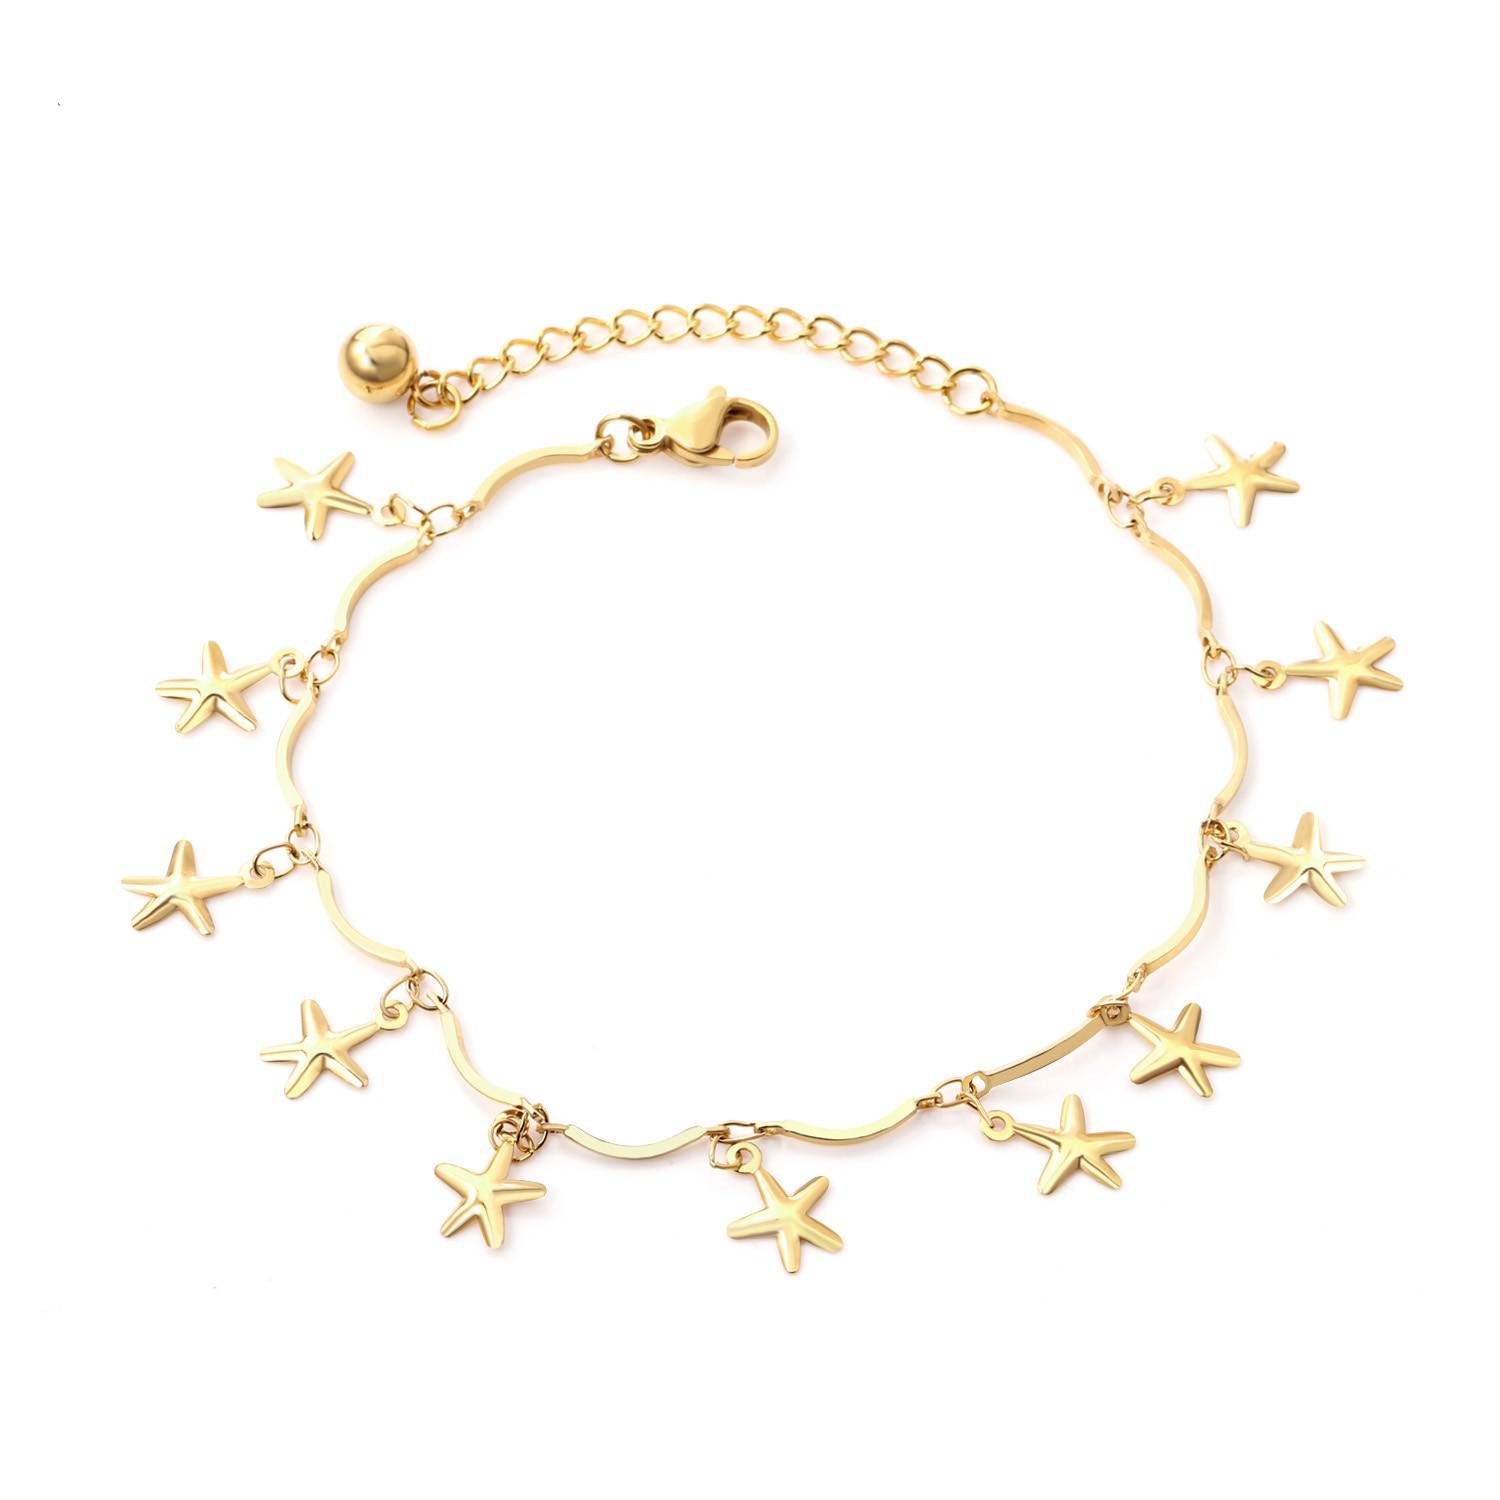 TESSA – Stainless Steel Starfish Chain Anklet Anklets Brand Name: LUXUSTEEL